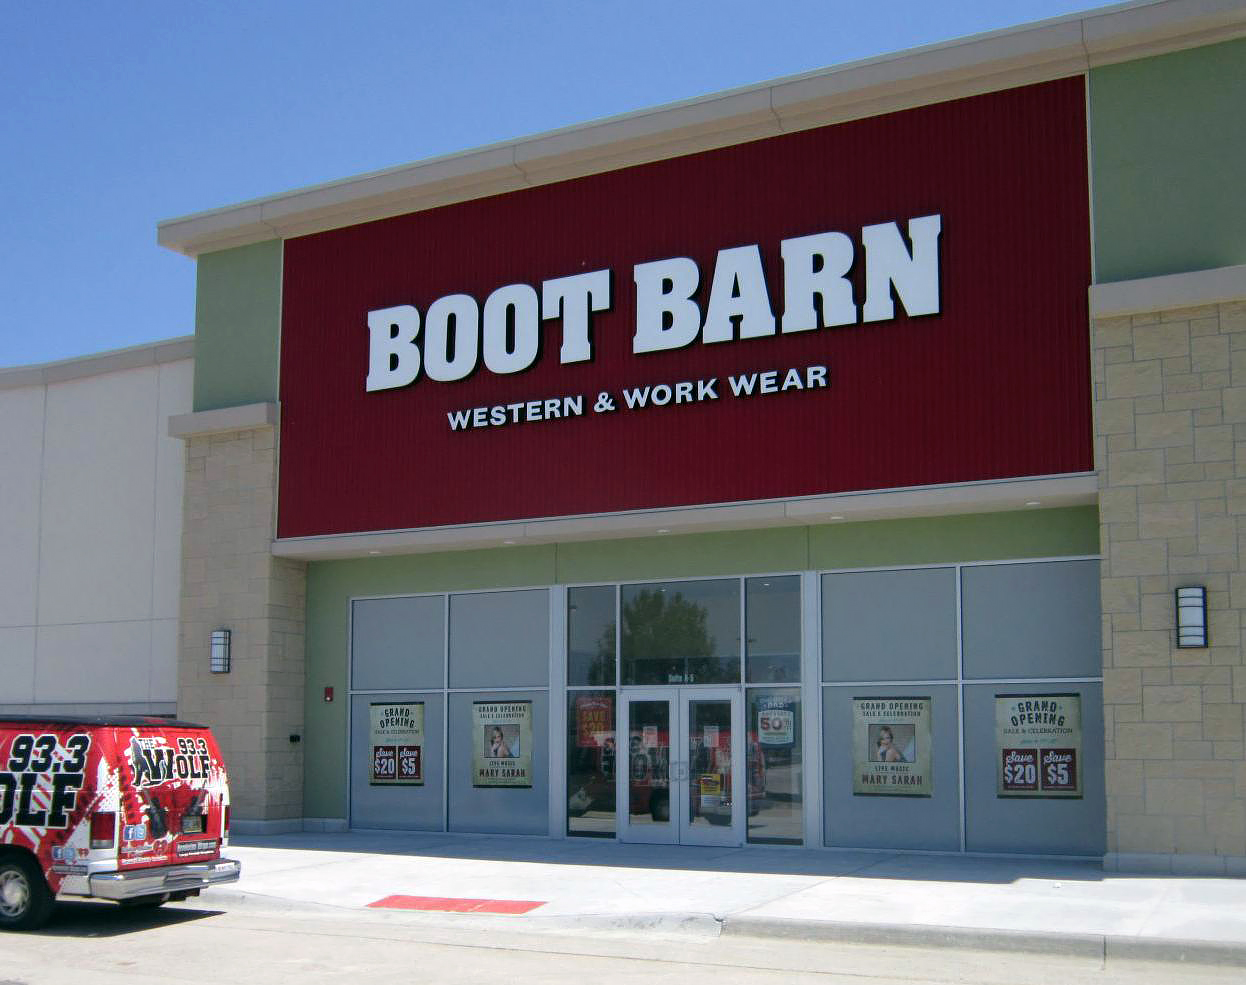 HCW/Branson Landing Announces Boot Barn to Open a New Location